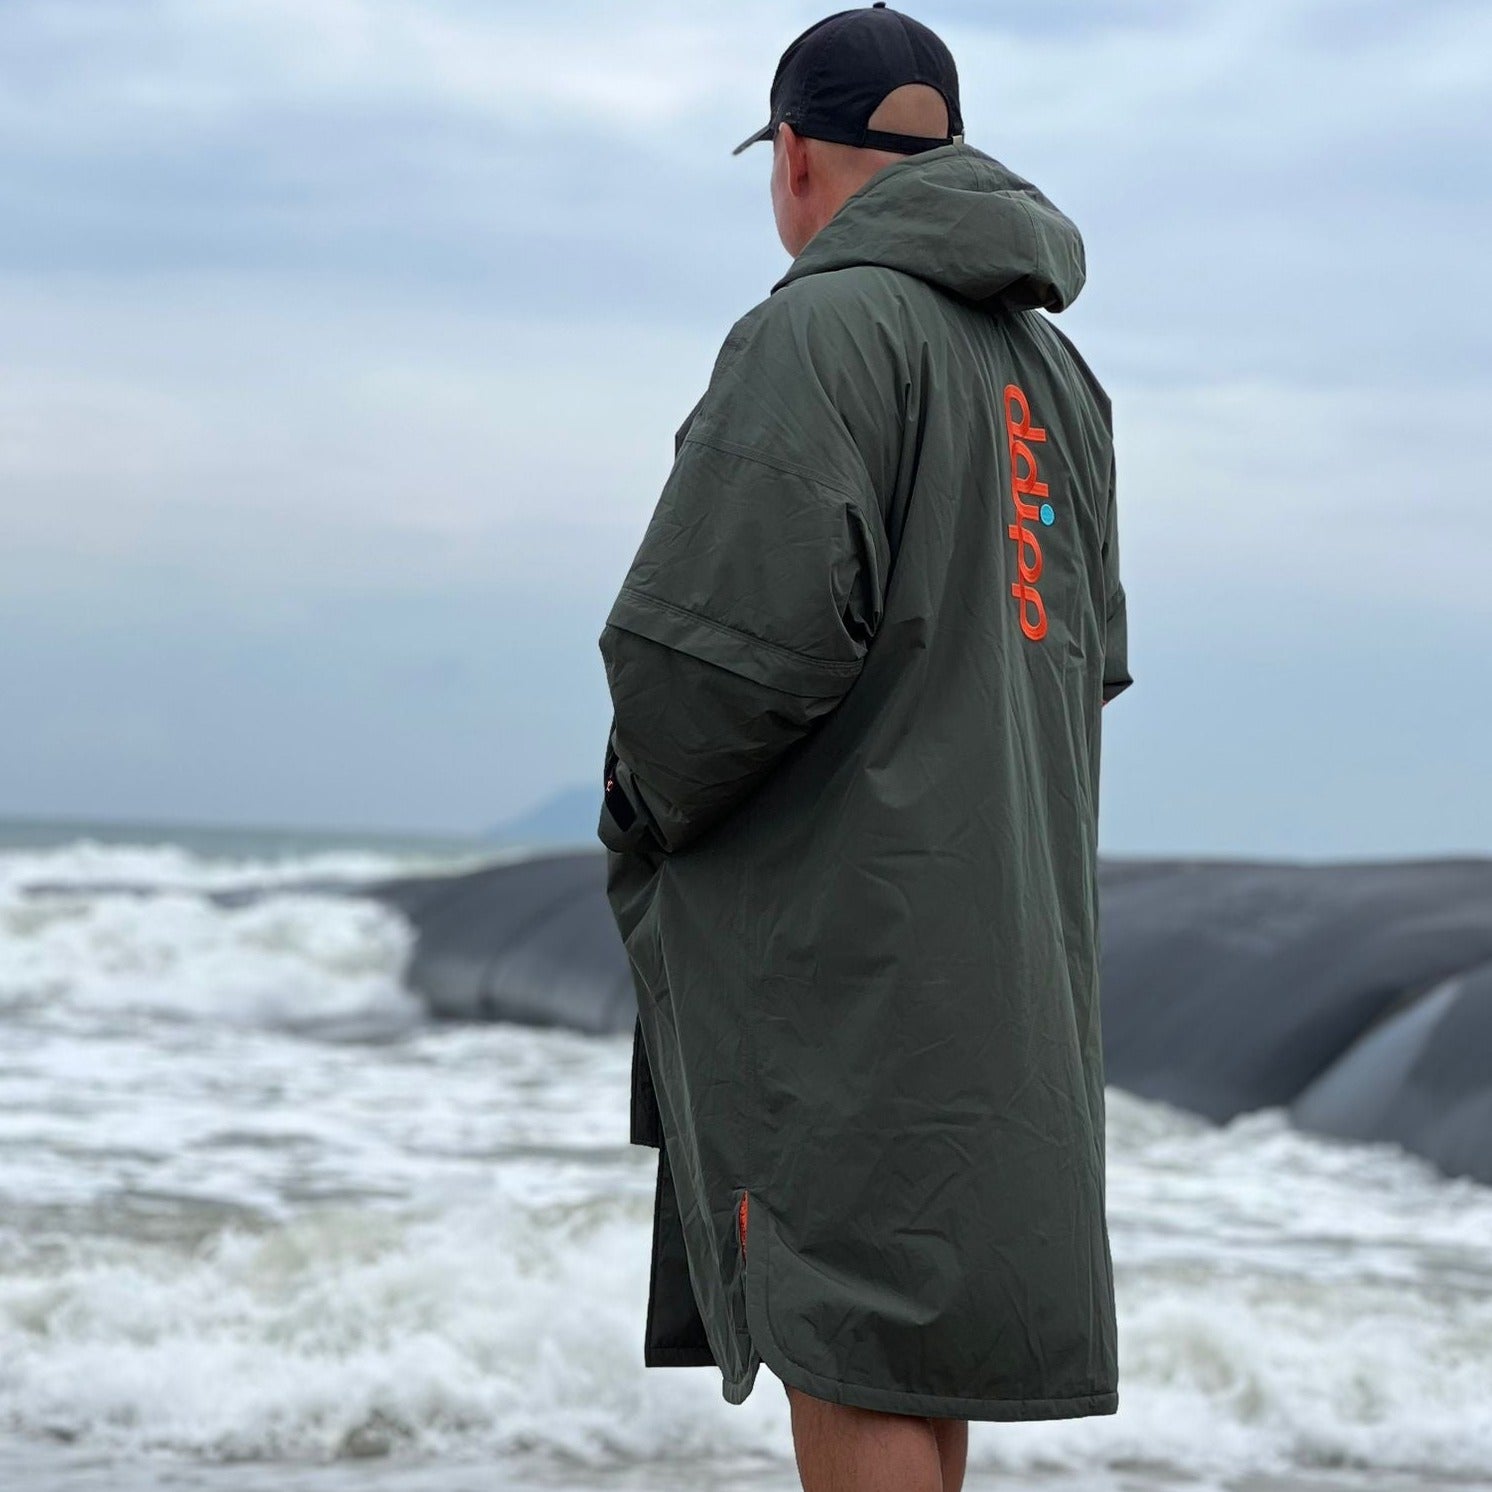 A model wearing the ddipp sports robe in the Olive and Orange Colour way